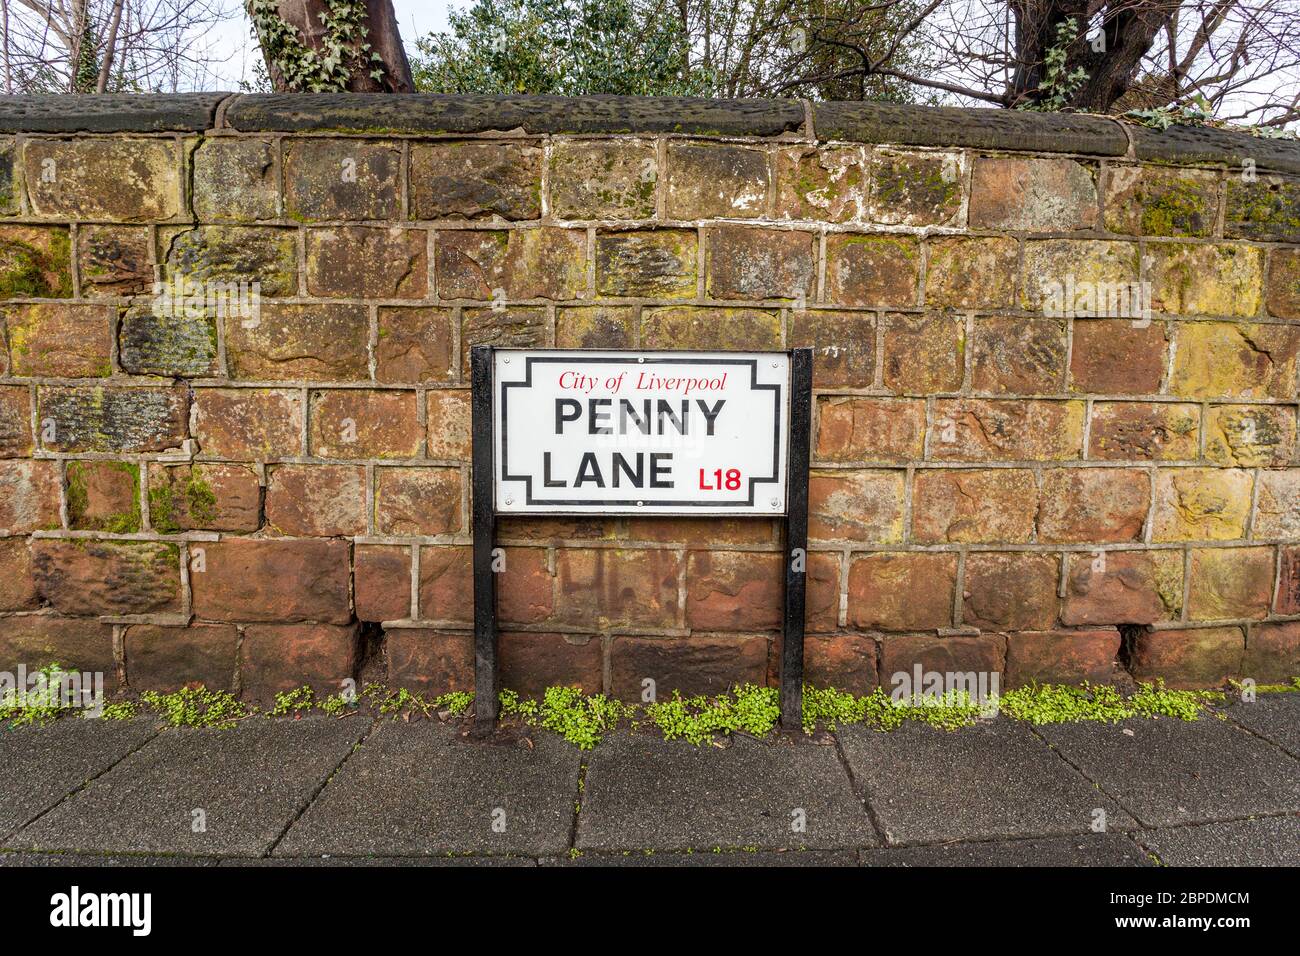 Street sign for Penny Lane, made famous by The Beatles' song of the same name, in the L18 district of Liverpool, England Stock Photo